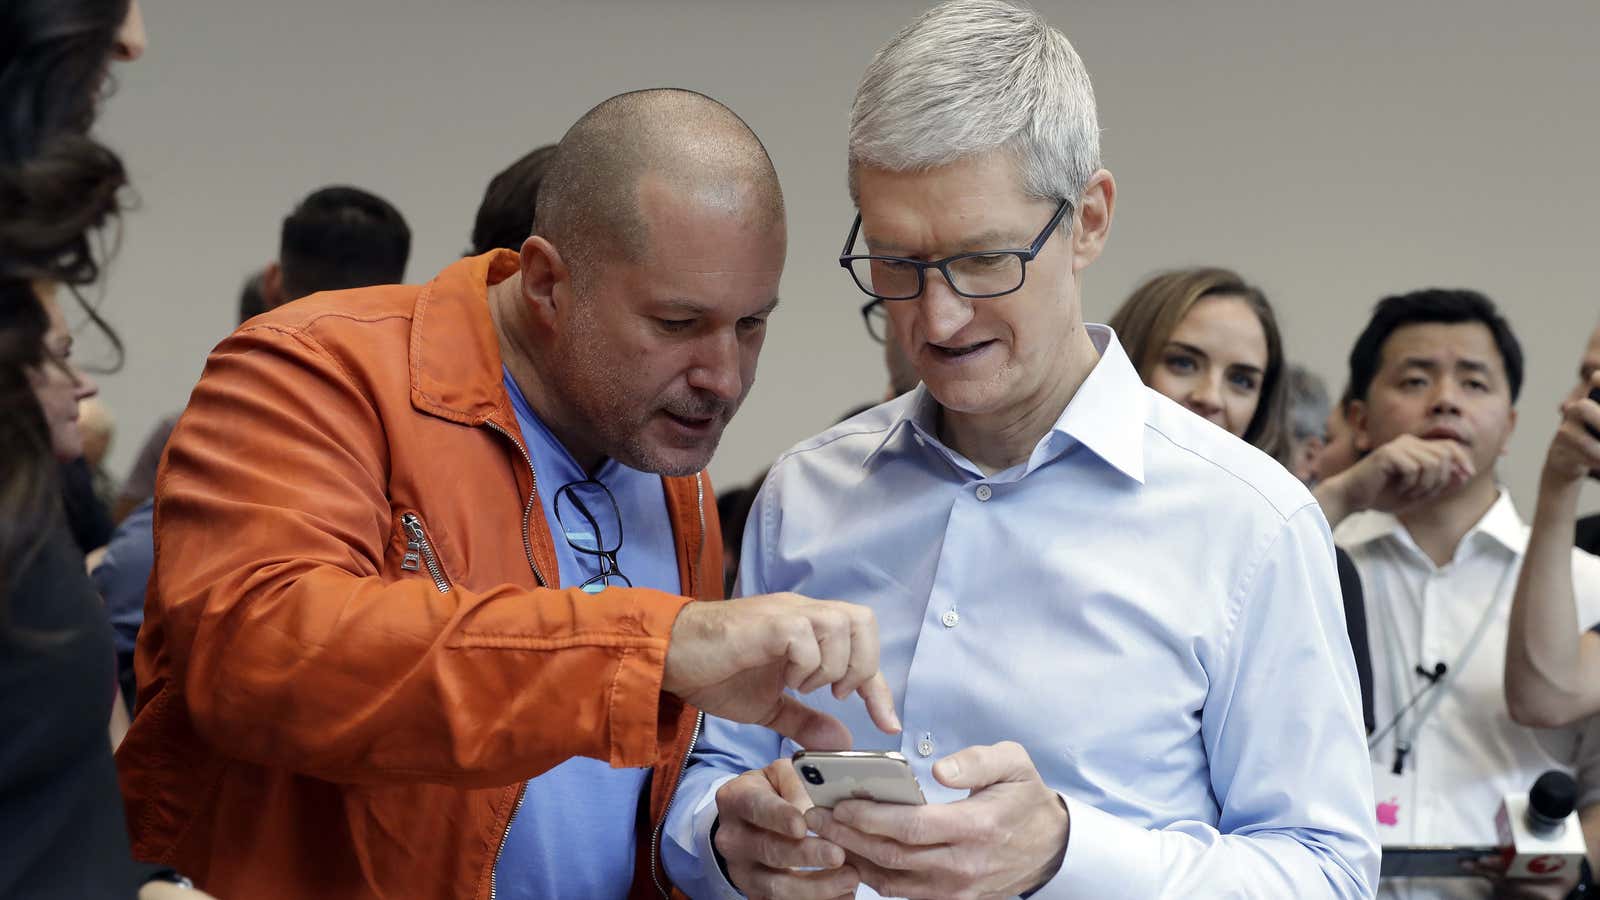 Apple CEO Tim Cook and design chief Jony Ive, presumably ordering larger stockings for their mantlepieces.